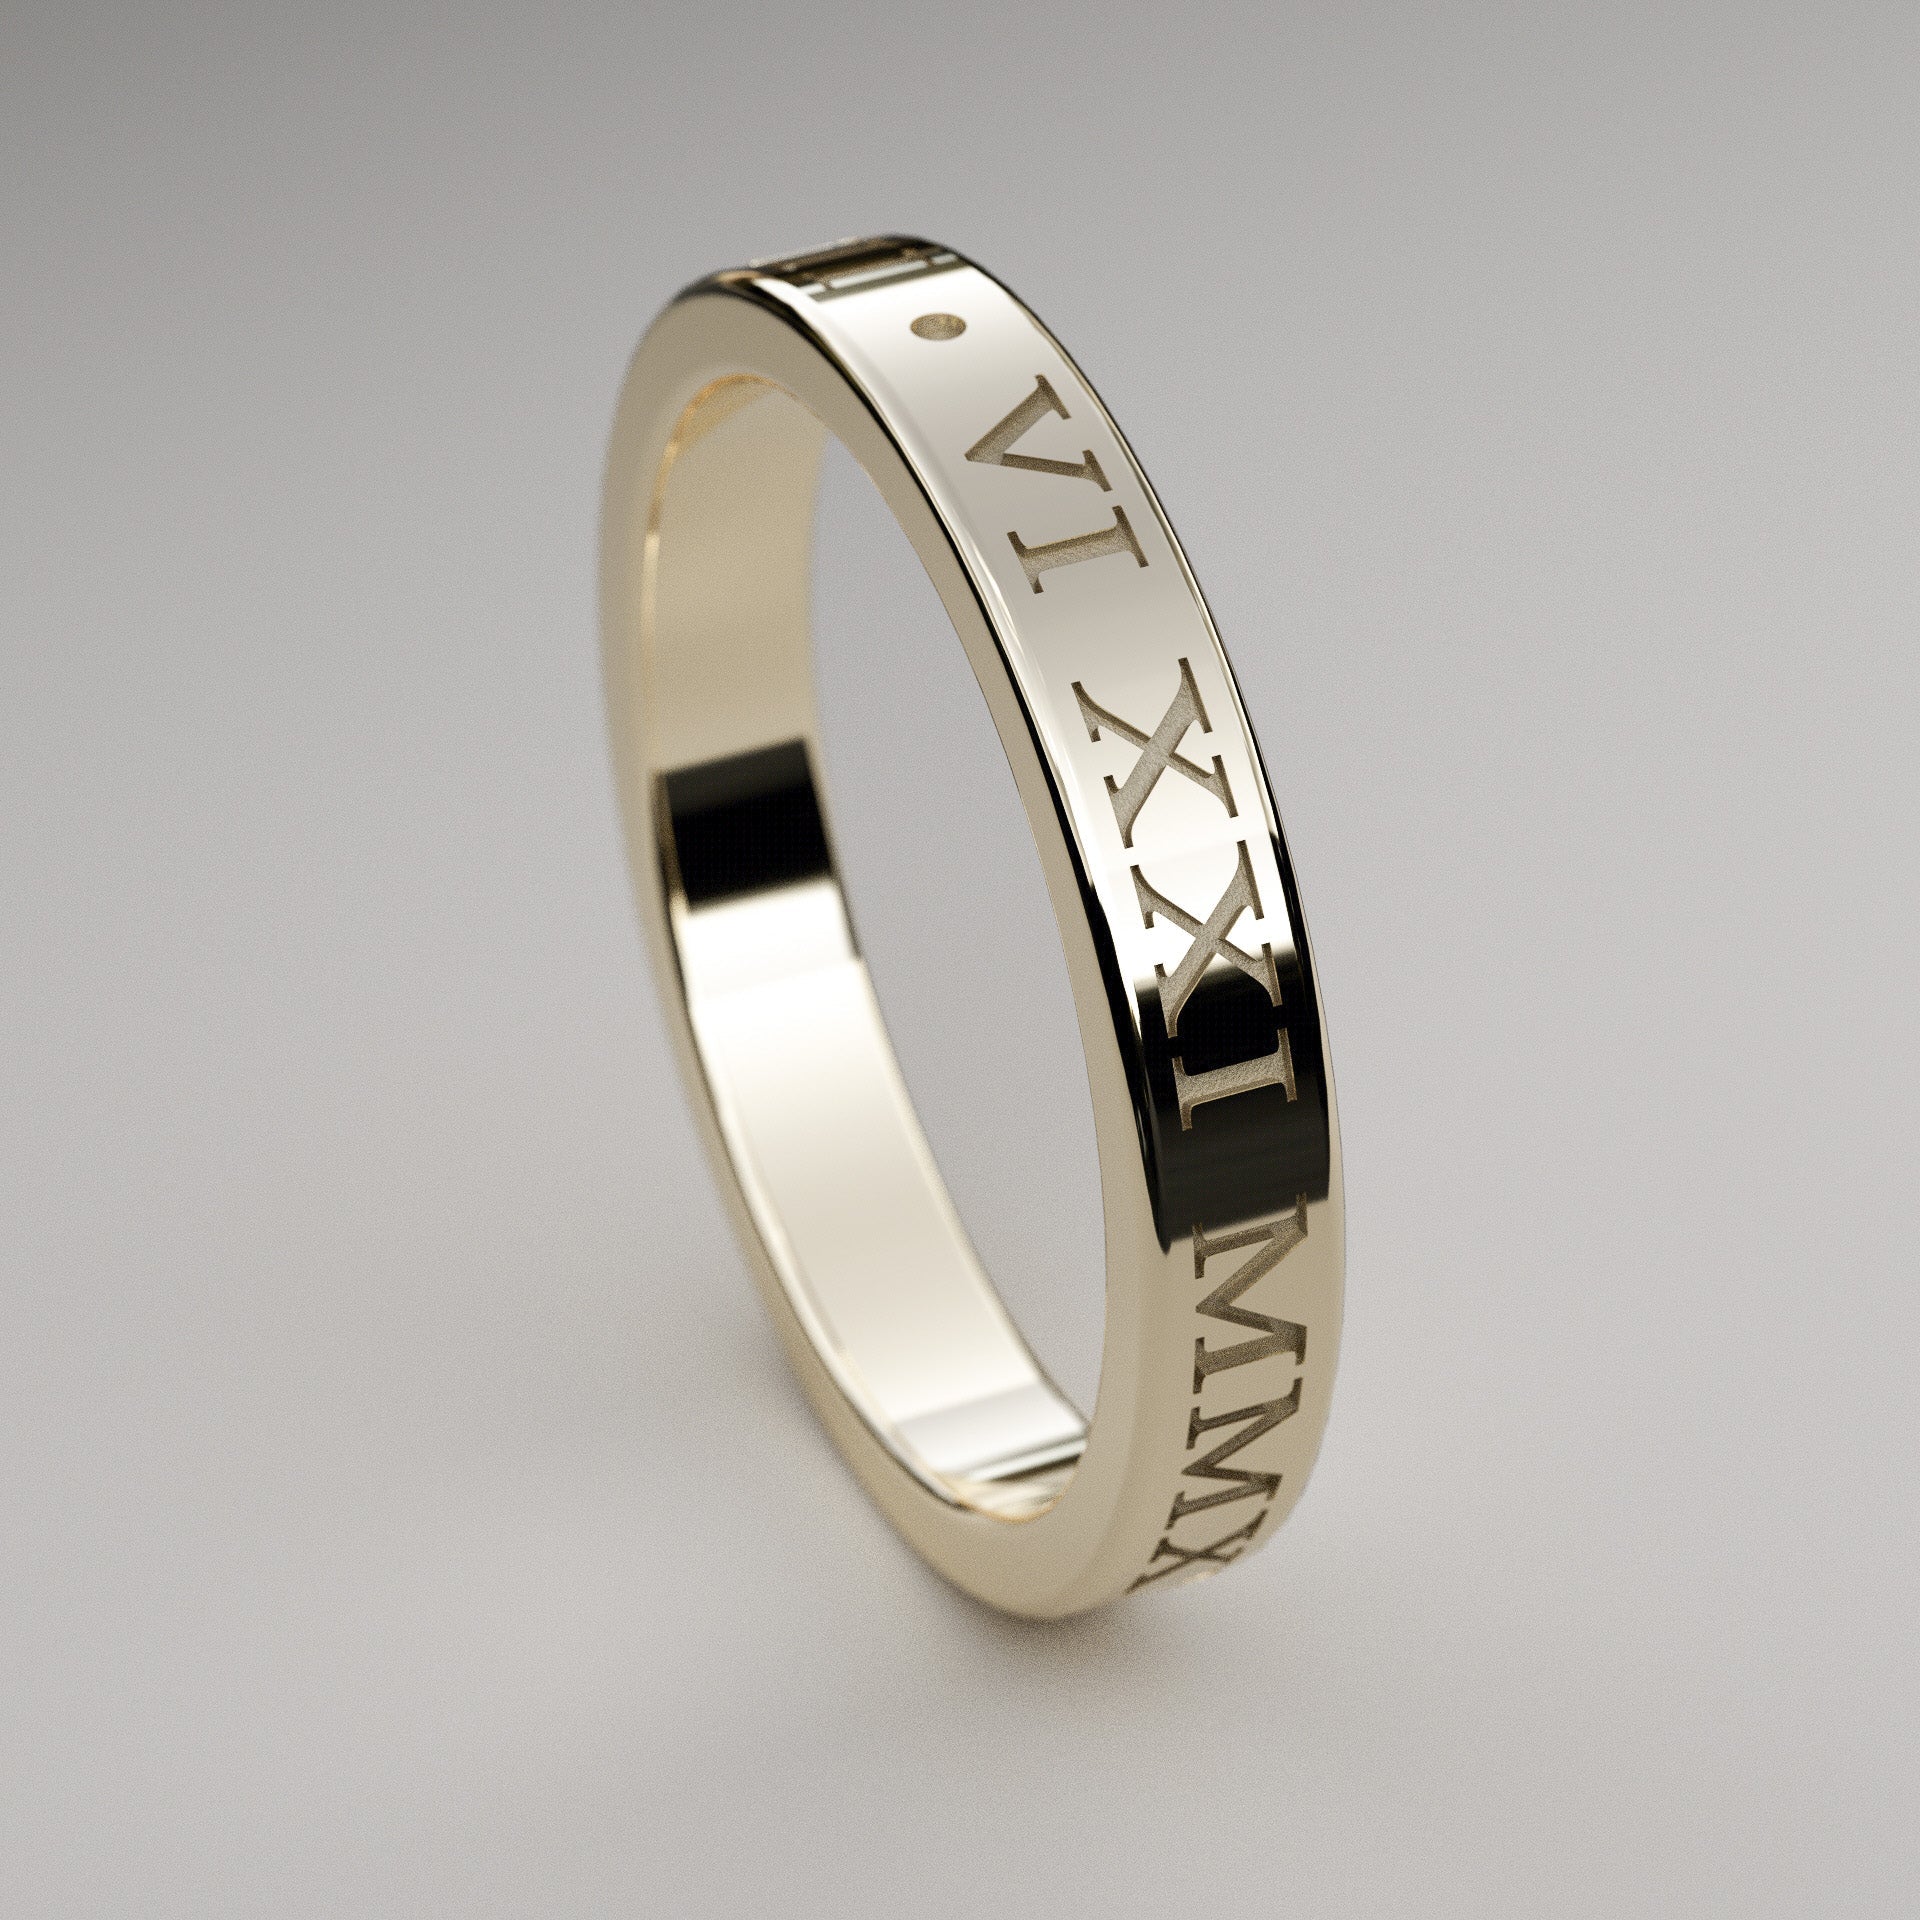 Engraved style custom Roman Numeral ring in yellow gold